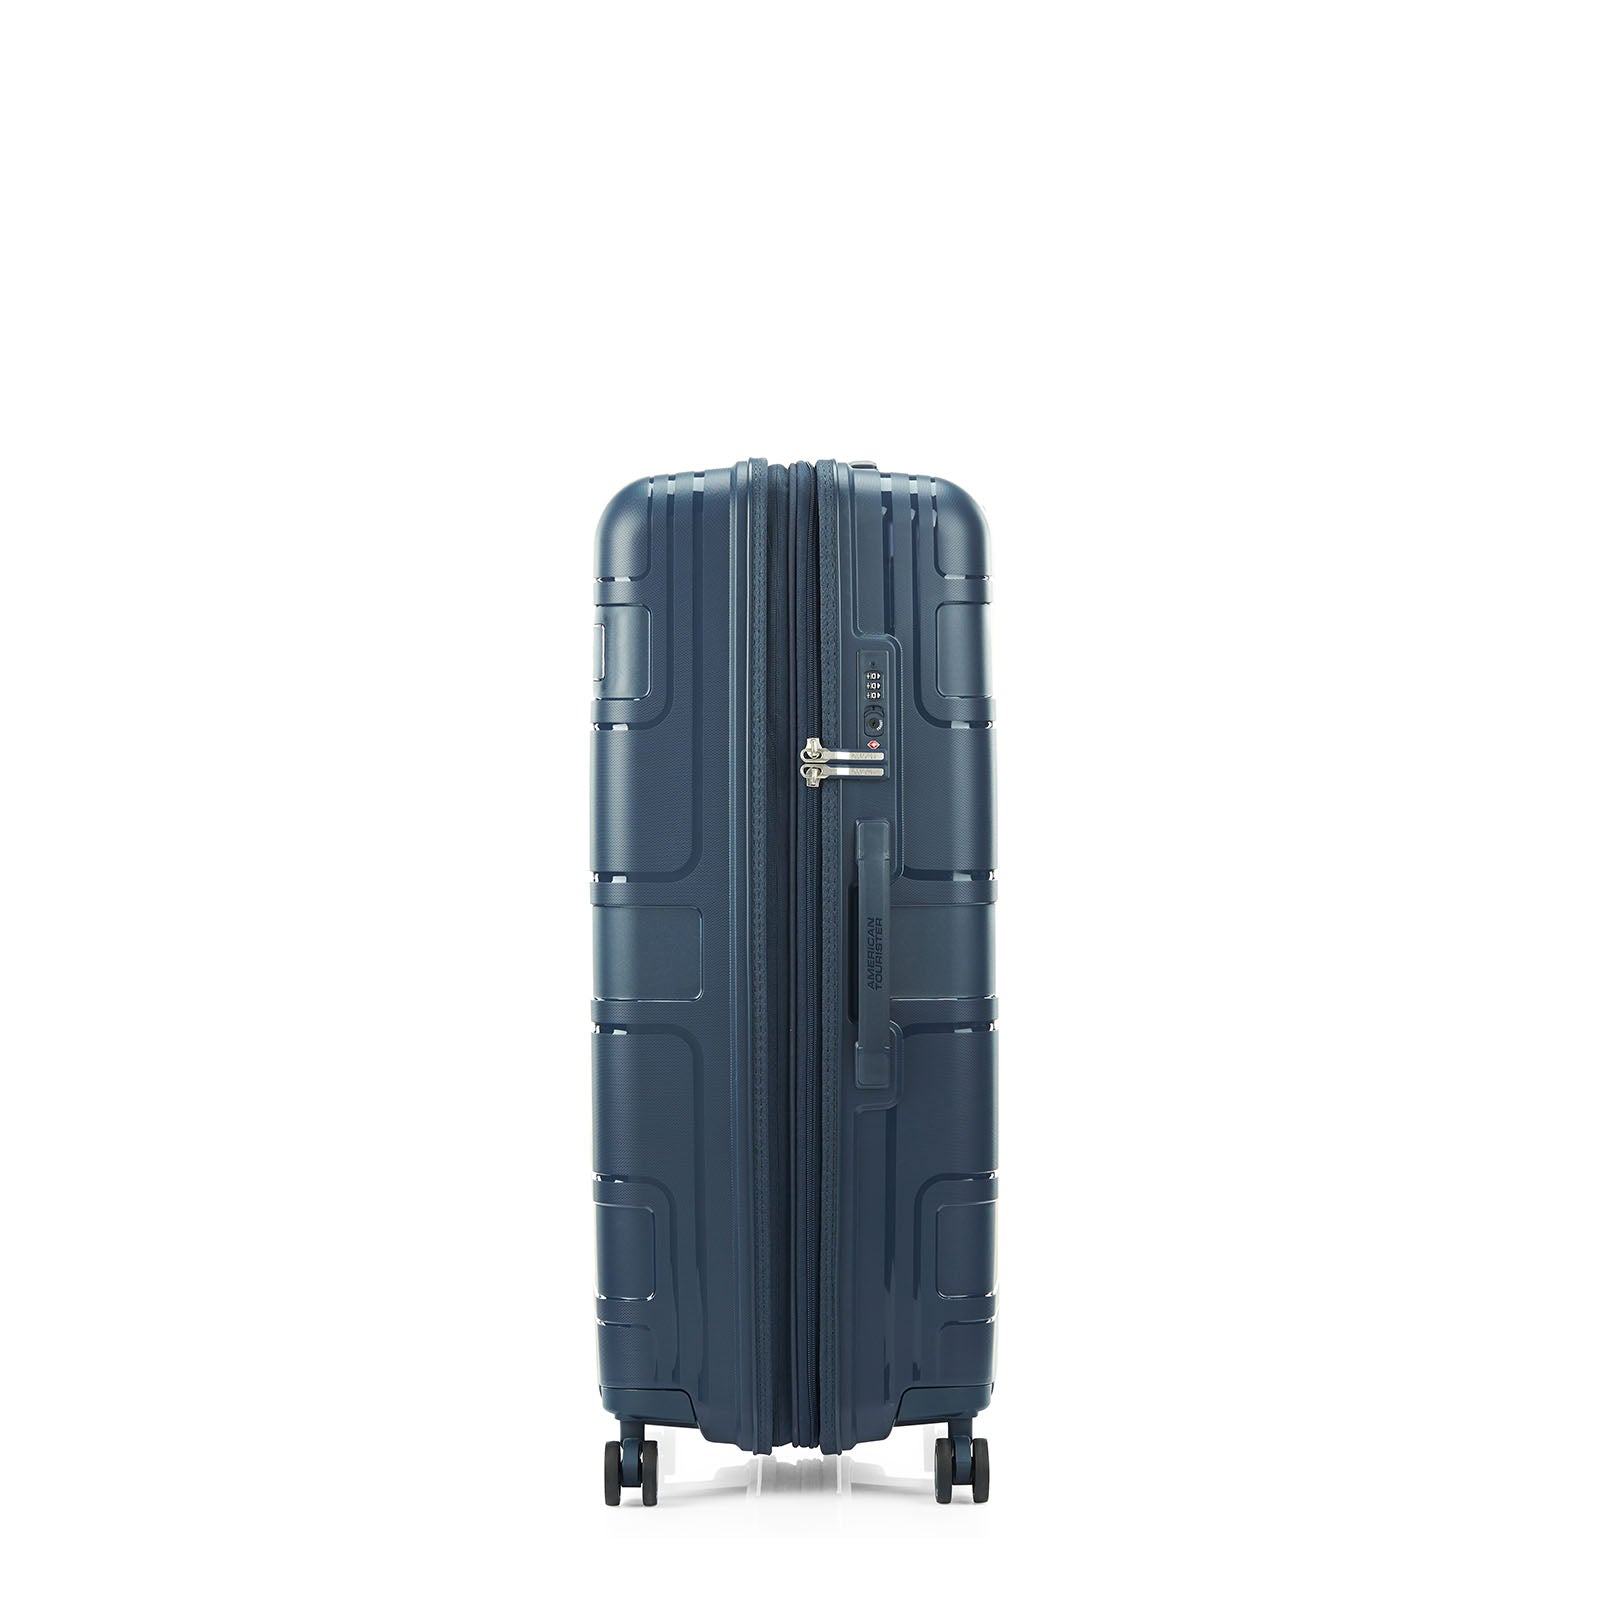 American-Tourister-Light-Max-82cm-Suitcase-Navy-Side-Lock